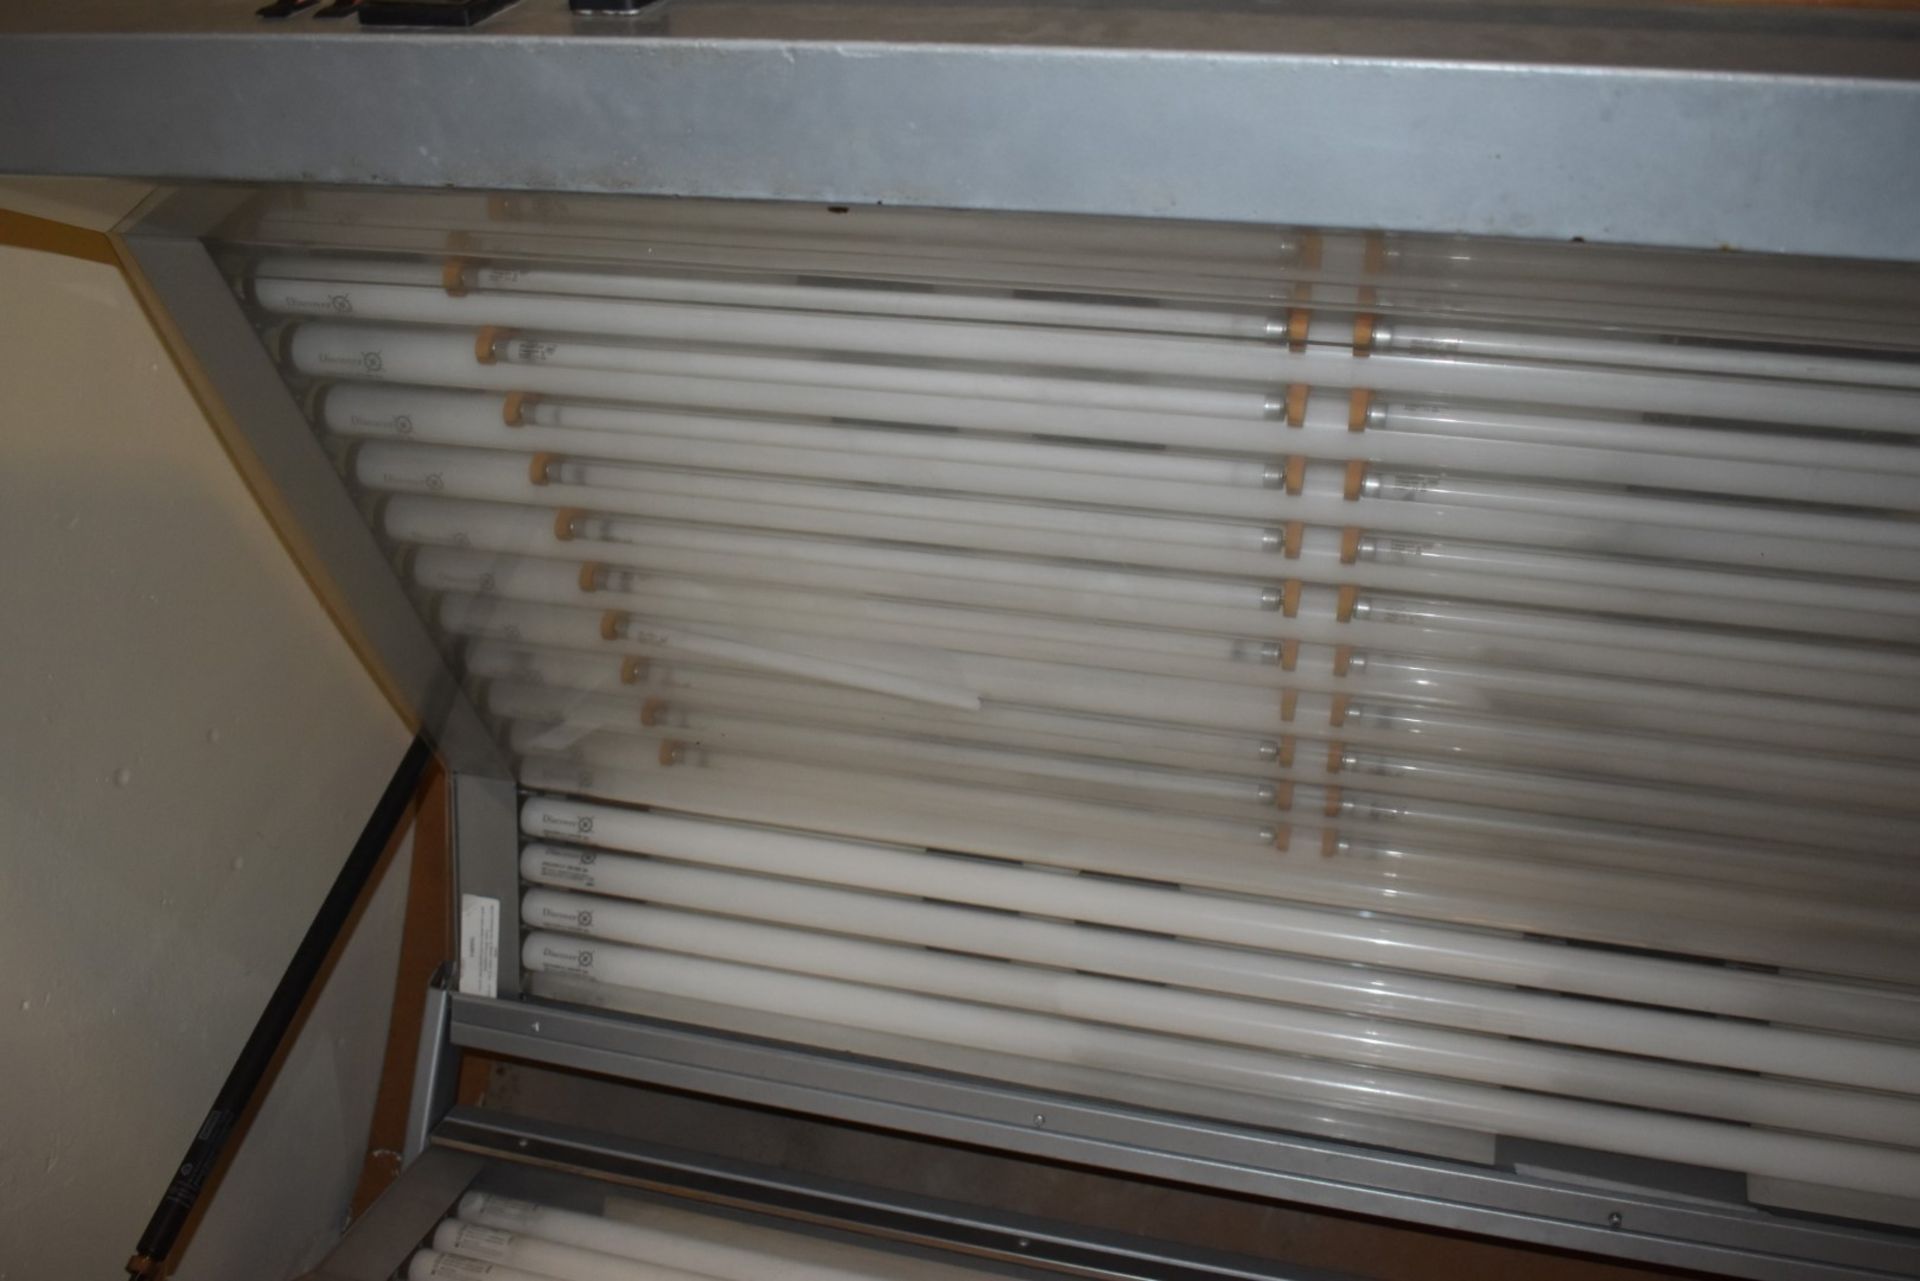 2 x Tanning Sunbeds to Include 1 x Laydown Sunbed and 1 x Standing Sunbed - Ideal For Gyms, Sunbed - Image 5 of 24